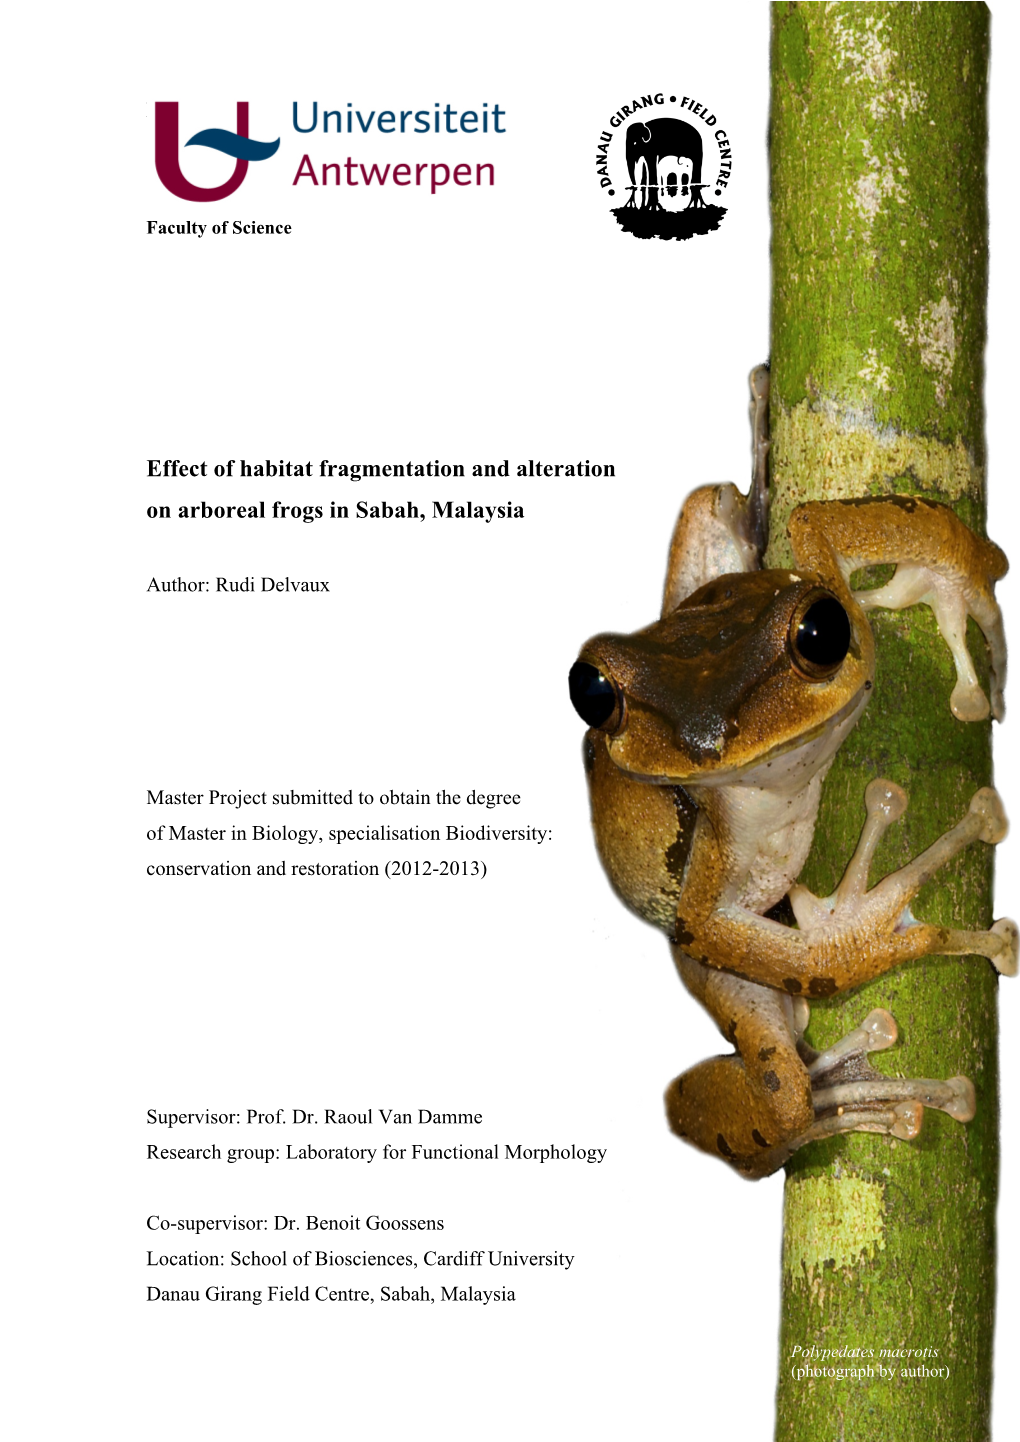 Effect of Habitat Fragmentation and Alteration on Arboreal Frogs in Sabah, Malaysia